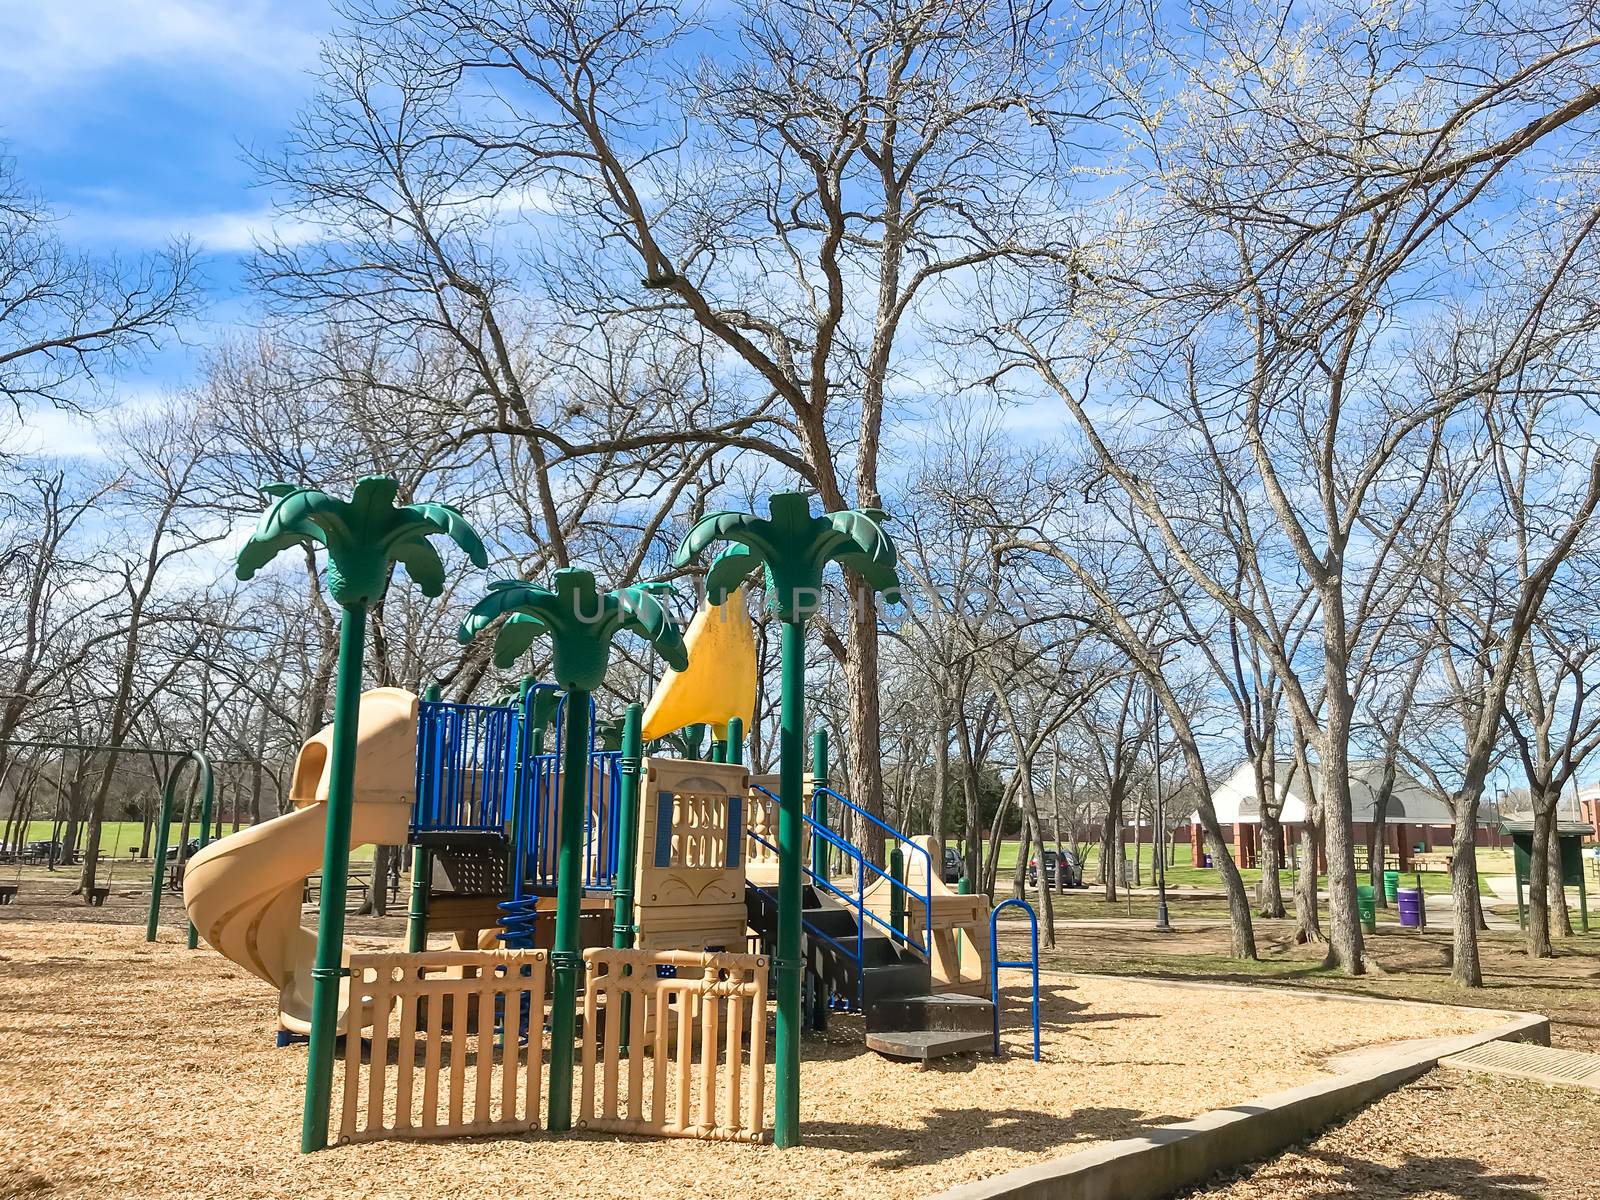 Outdoor playground surrounded by bare trees in wintertime in North Texas, America by trongnguyen